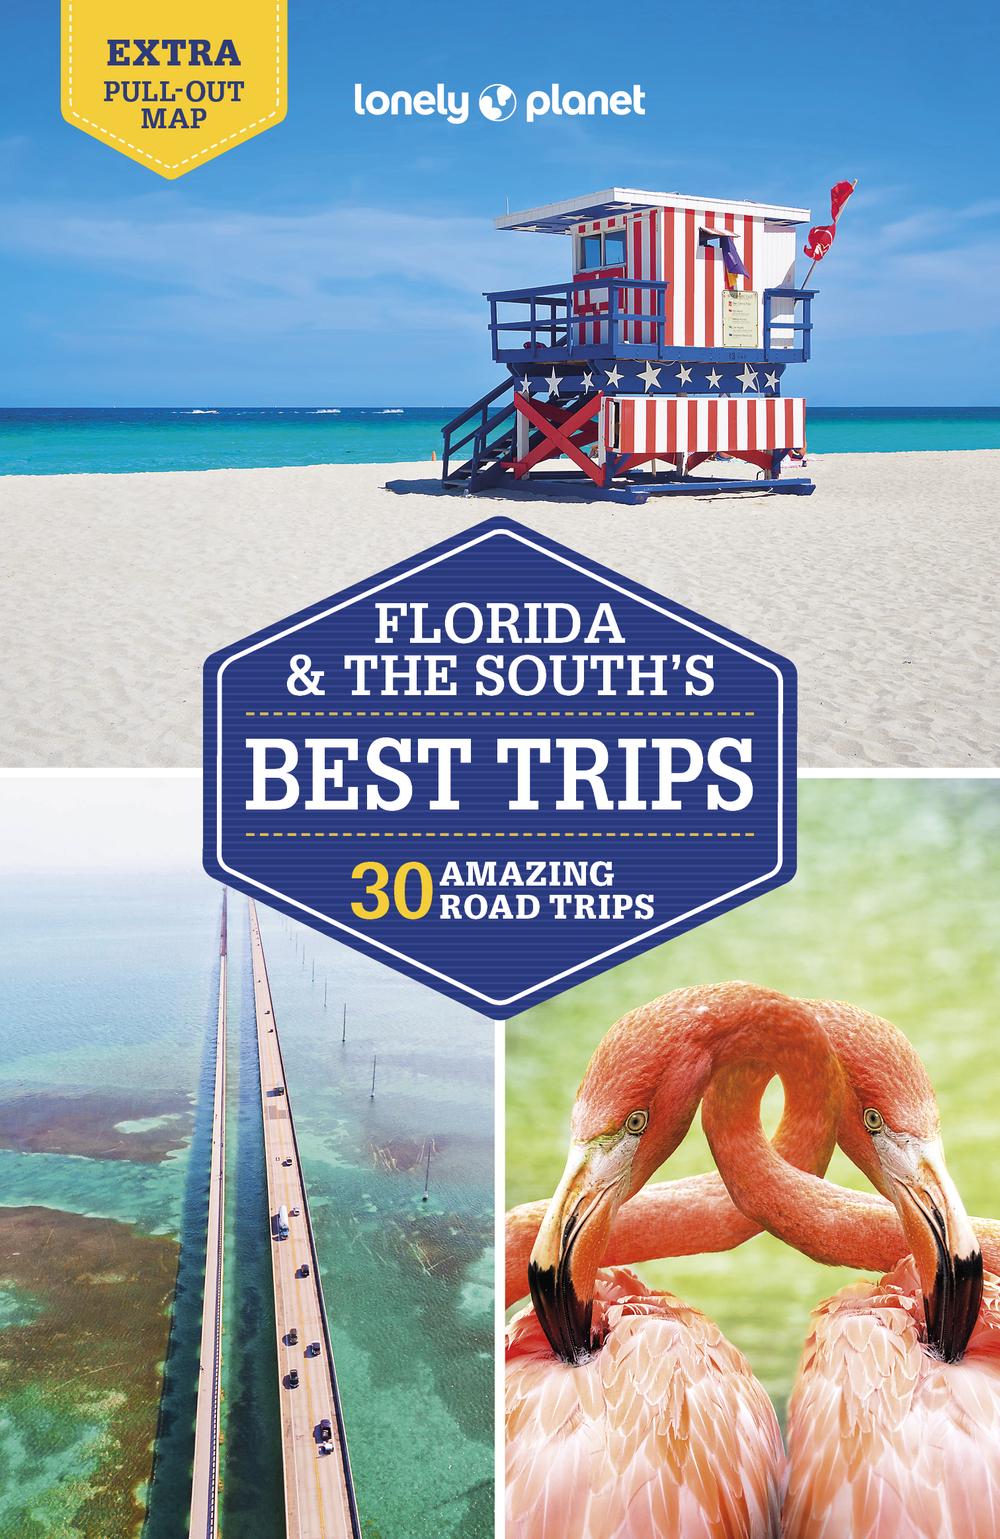 online　Florida　Lonely　The　Adam　Karlin,　the　Planet　Buy　Trips　at　South's　Best　9781787015685　by　Paperback,　Nile